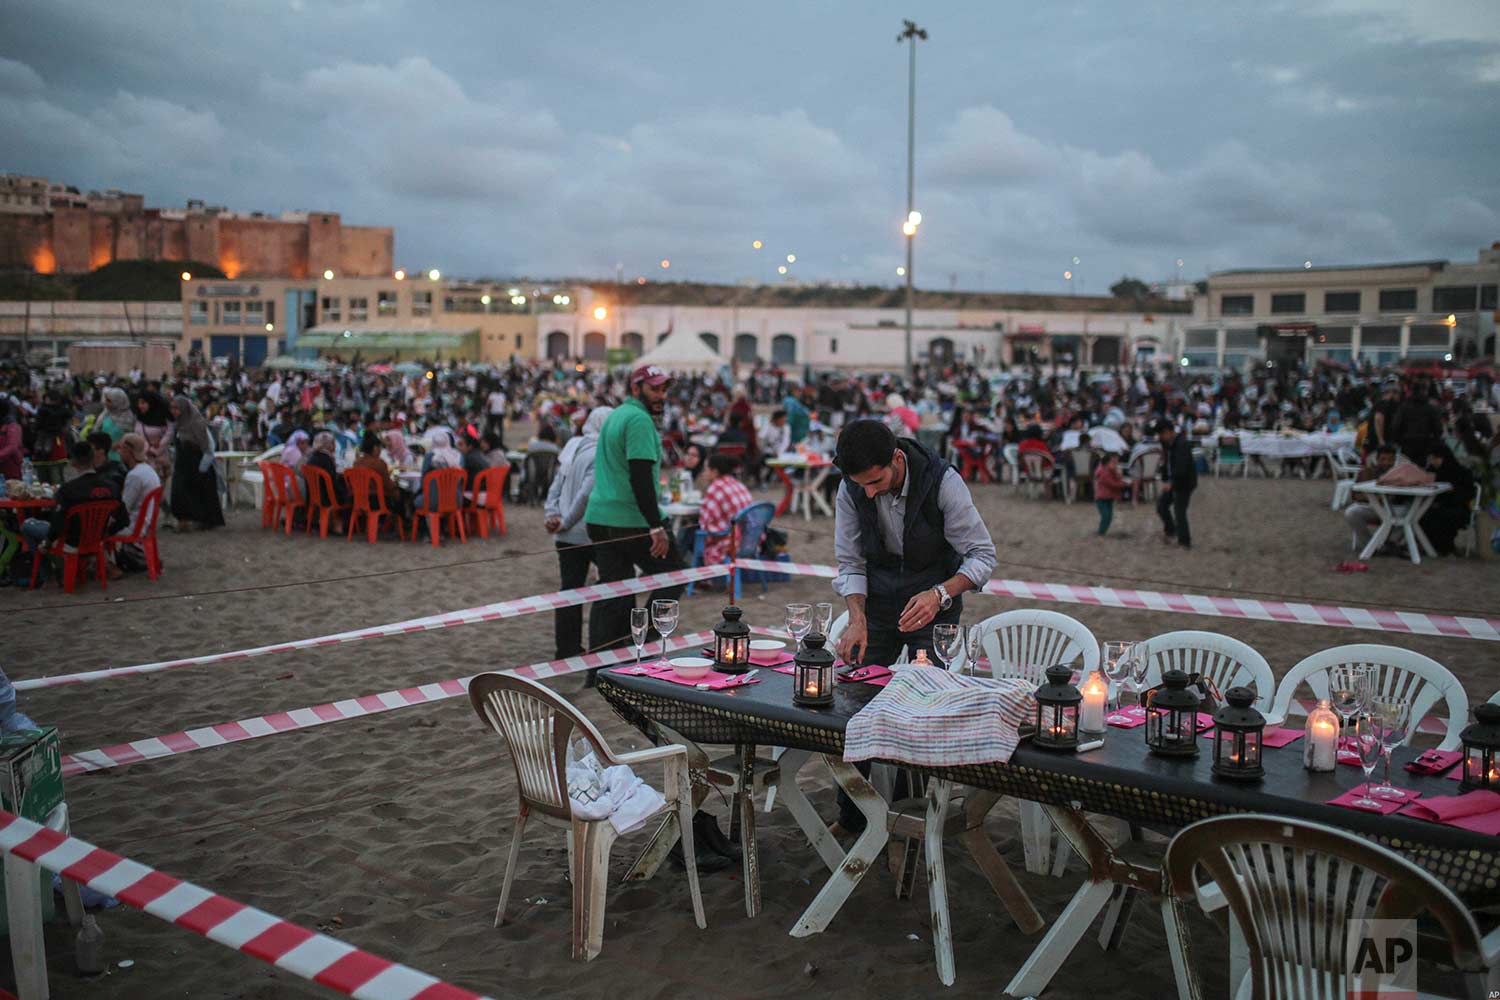  A man prepares a table for beachgoers to break their fast in the holy month of Ramadan, in Rabat, Morocco, Saturday, June 9, 2018. (AP Photo/Mosa'ab Elshamy) 